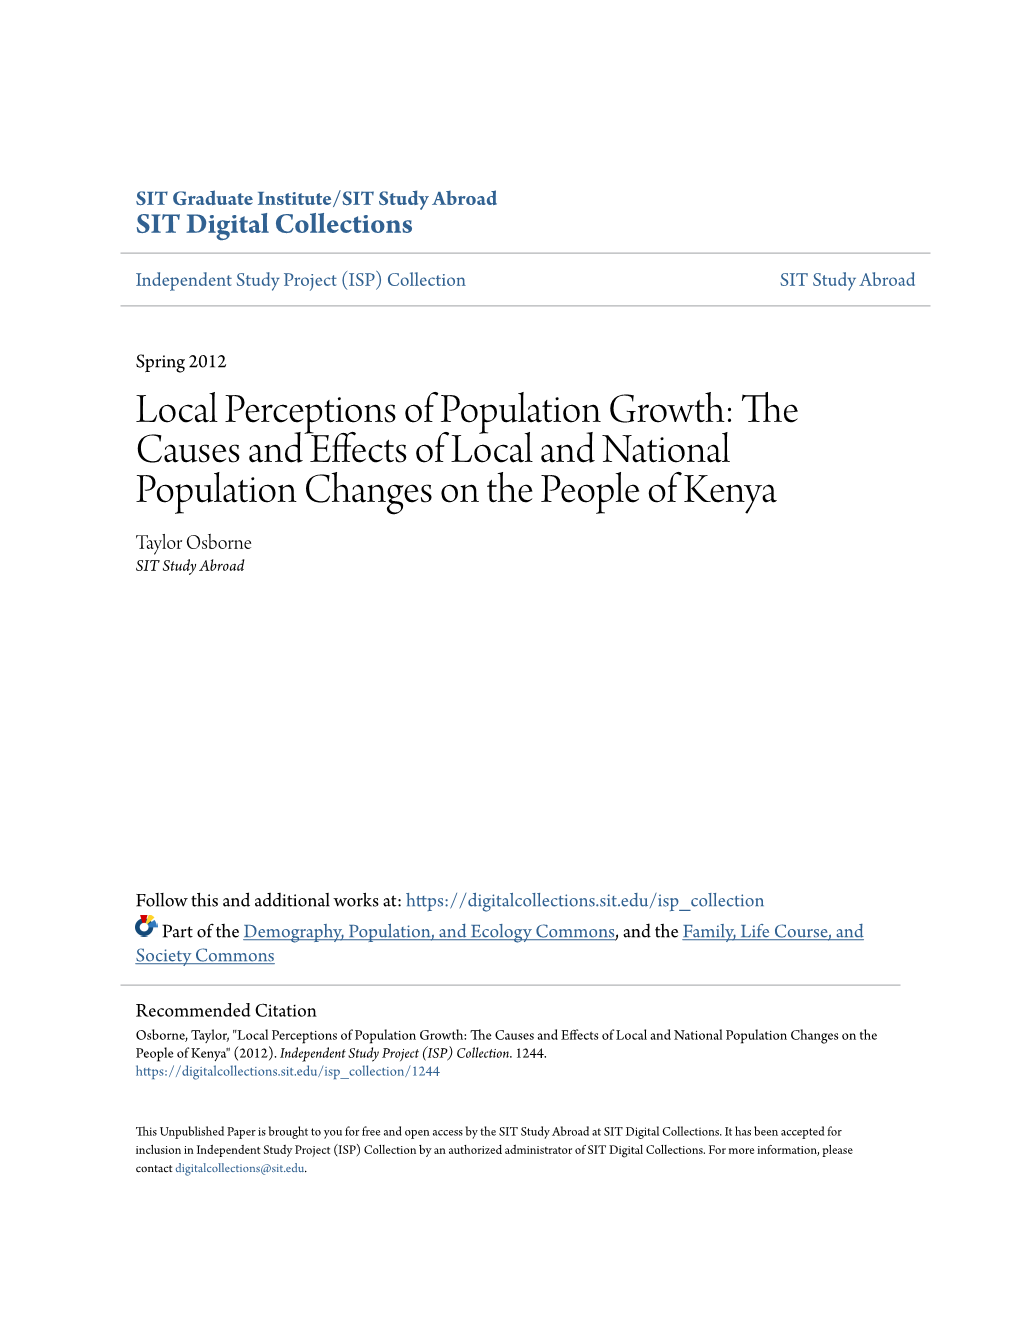 The Causes and Effects of Local and National Population Changes on the People of Kenya Taylor Osborne SIT Study Abroad